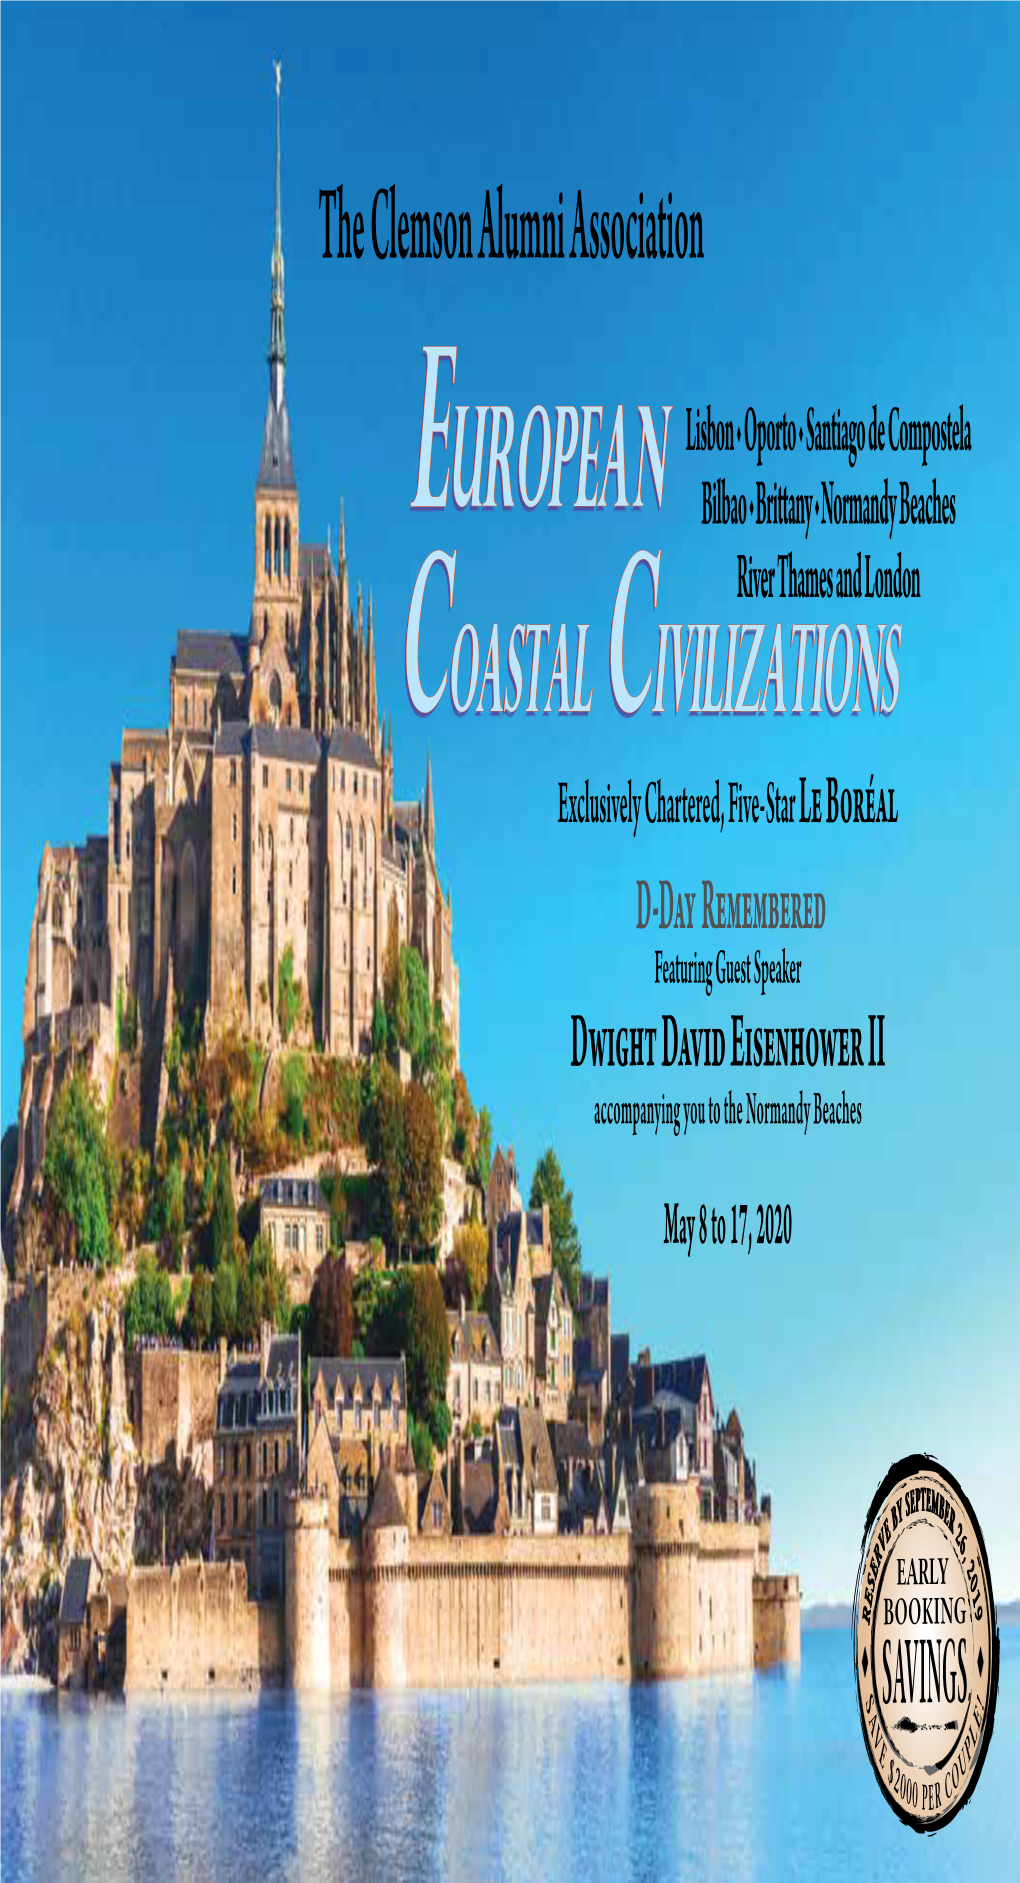 European Coastal Civilizations That Have Played a Substantial Role in World History